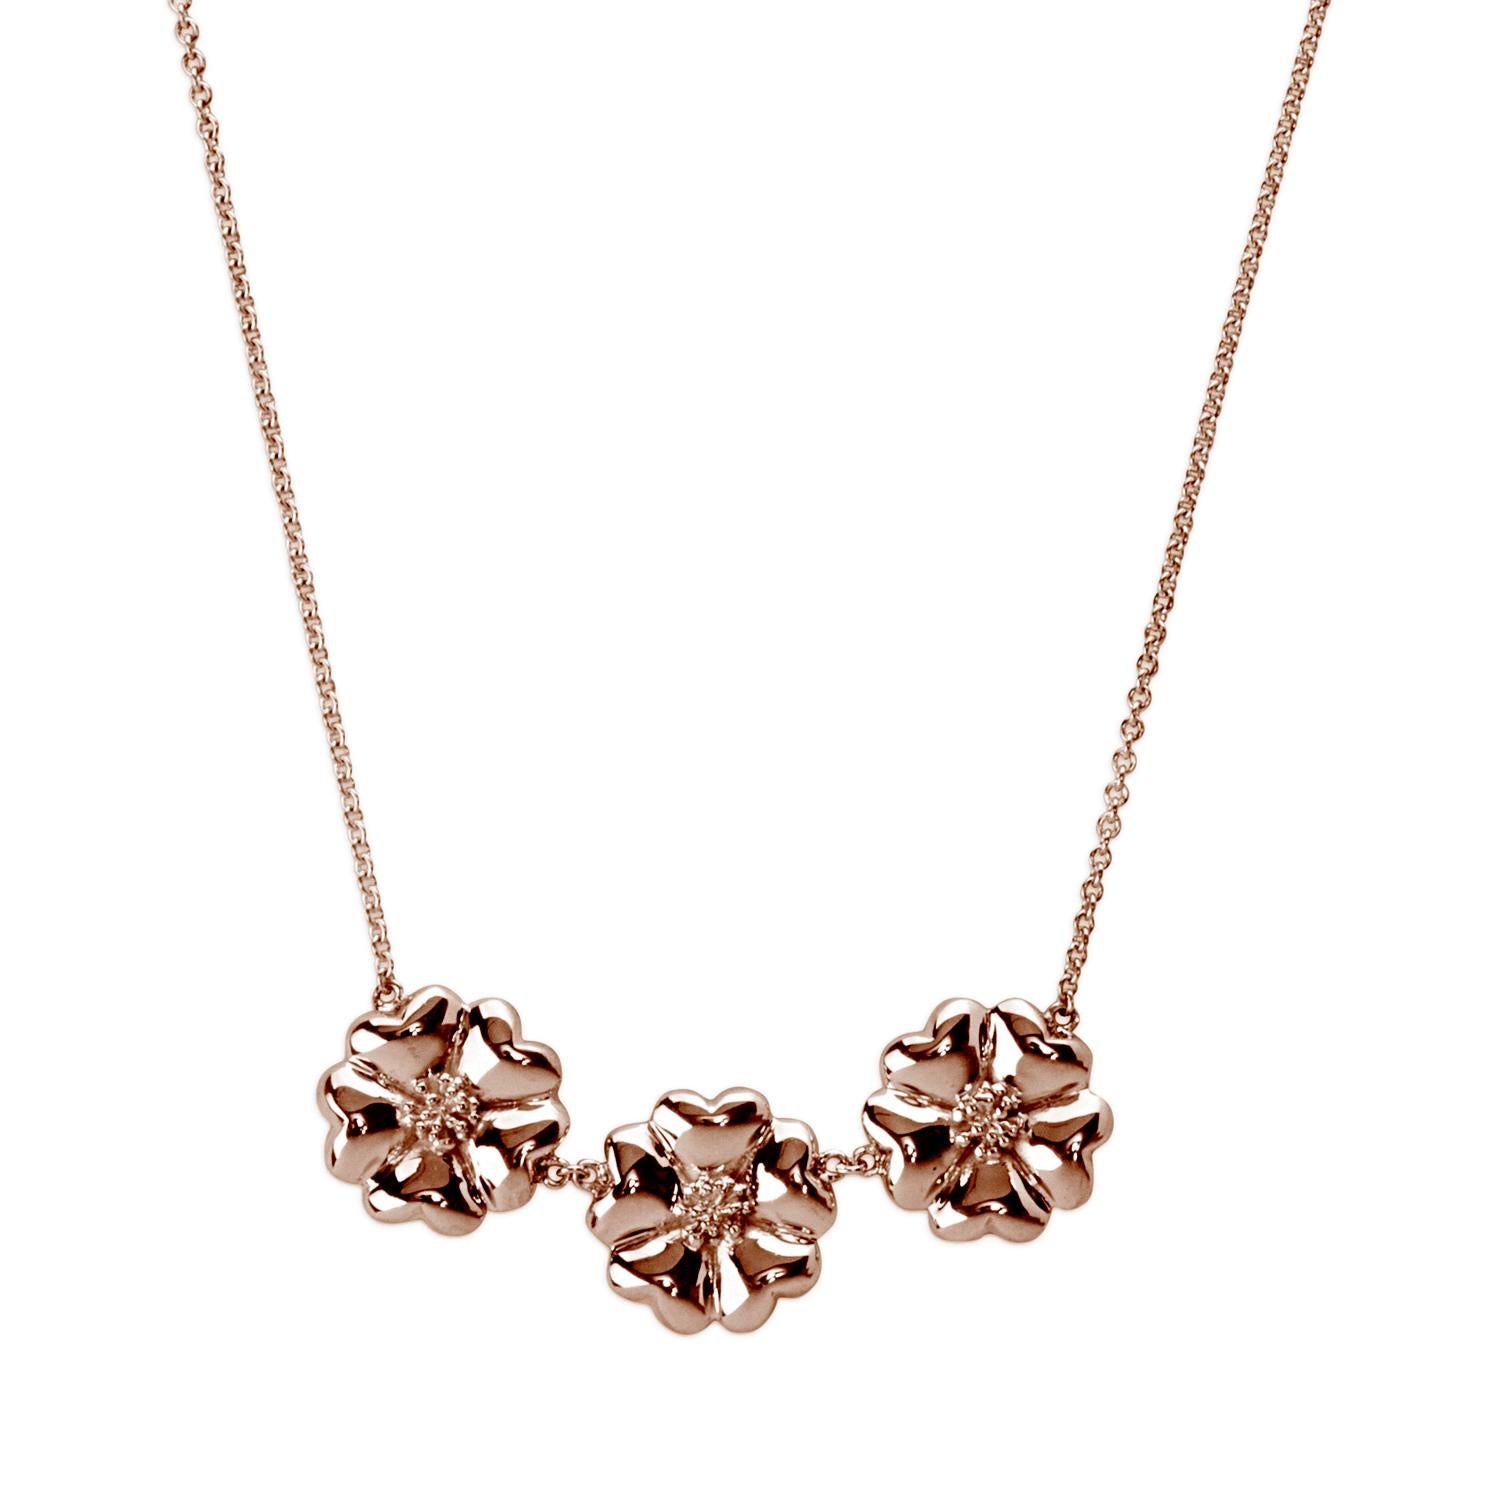 Designed in NYC

24k Yellow Gold Vermeil 123 Large Blossom Necklace. No matter the season, allow natural beauty to surround you wherever you go. 123 large blossom necklace: 

	Sterling silver chain and blossoms in 24k yellow gold vermeil